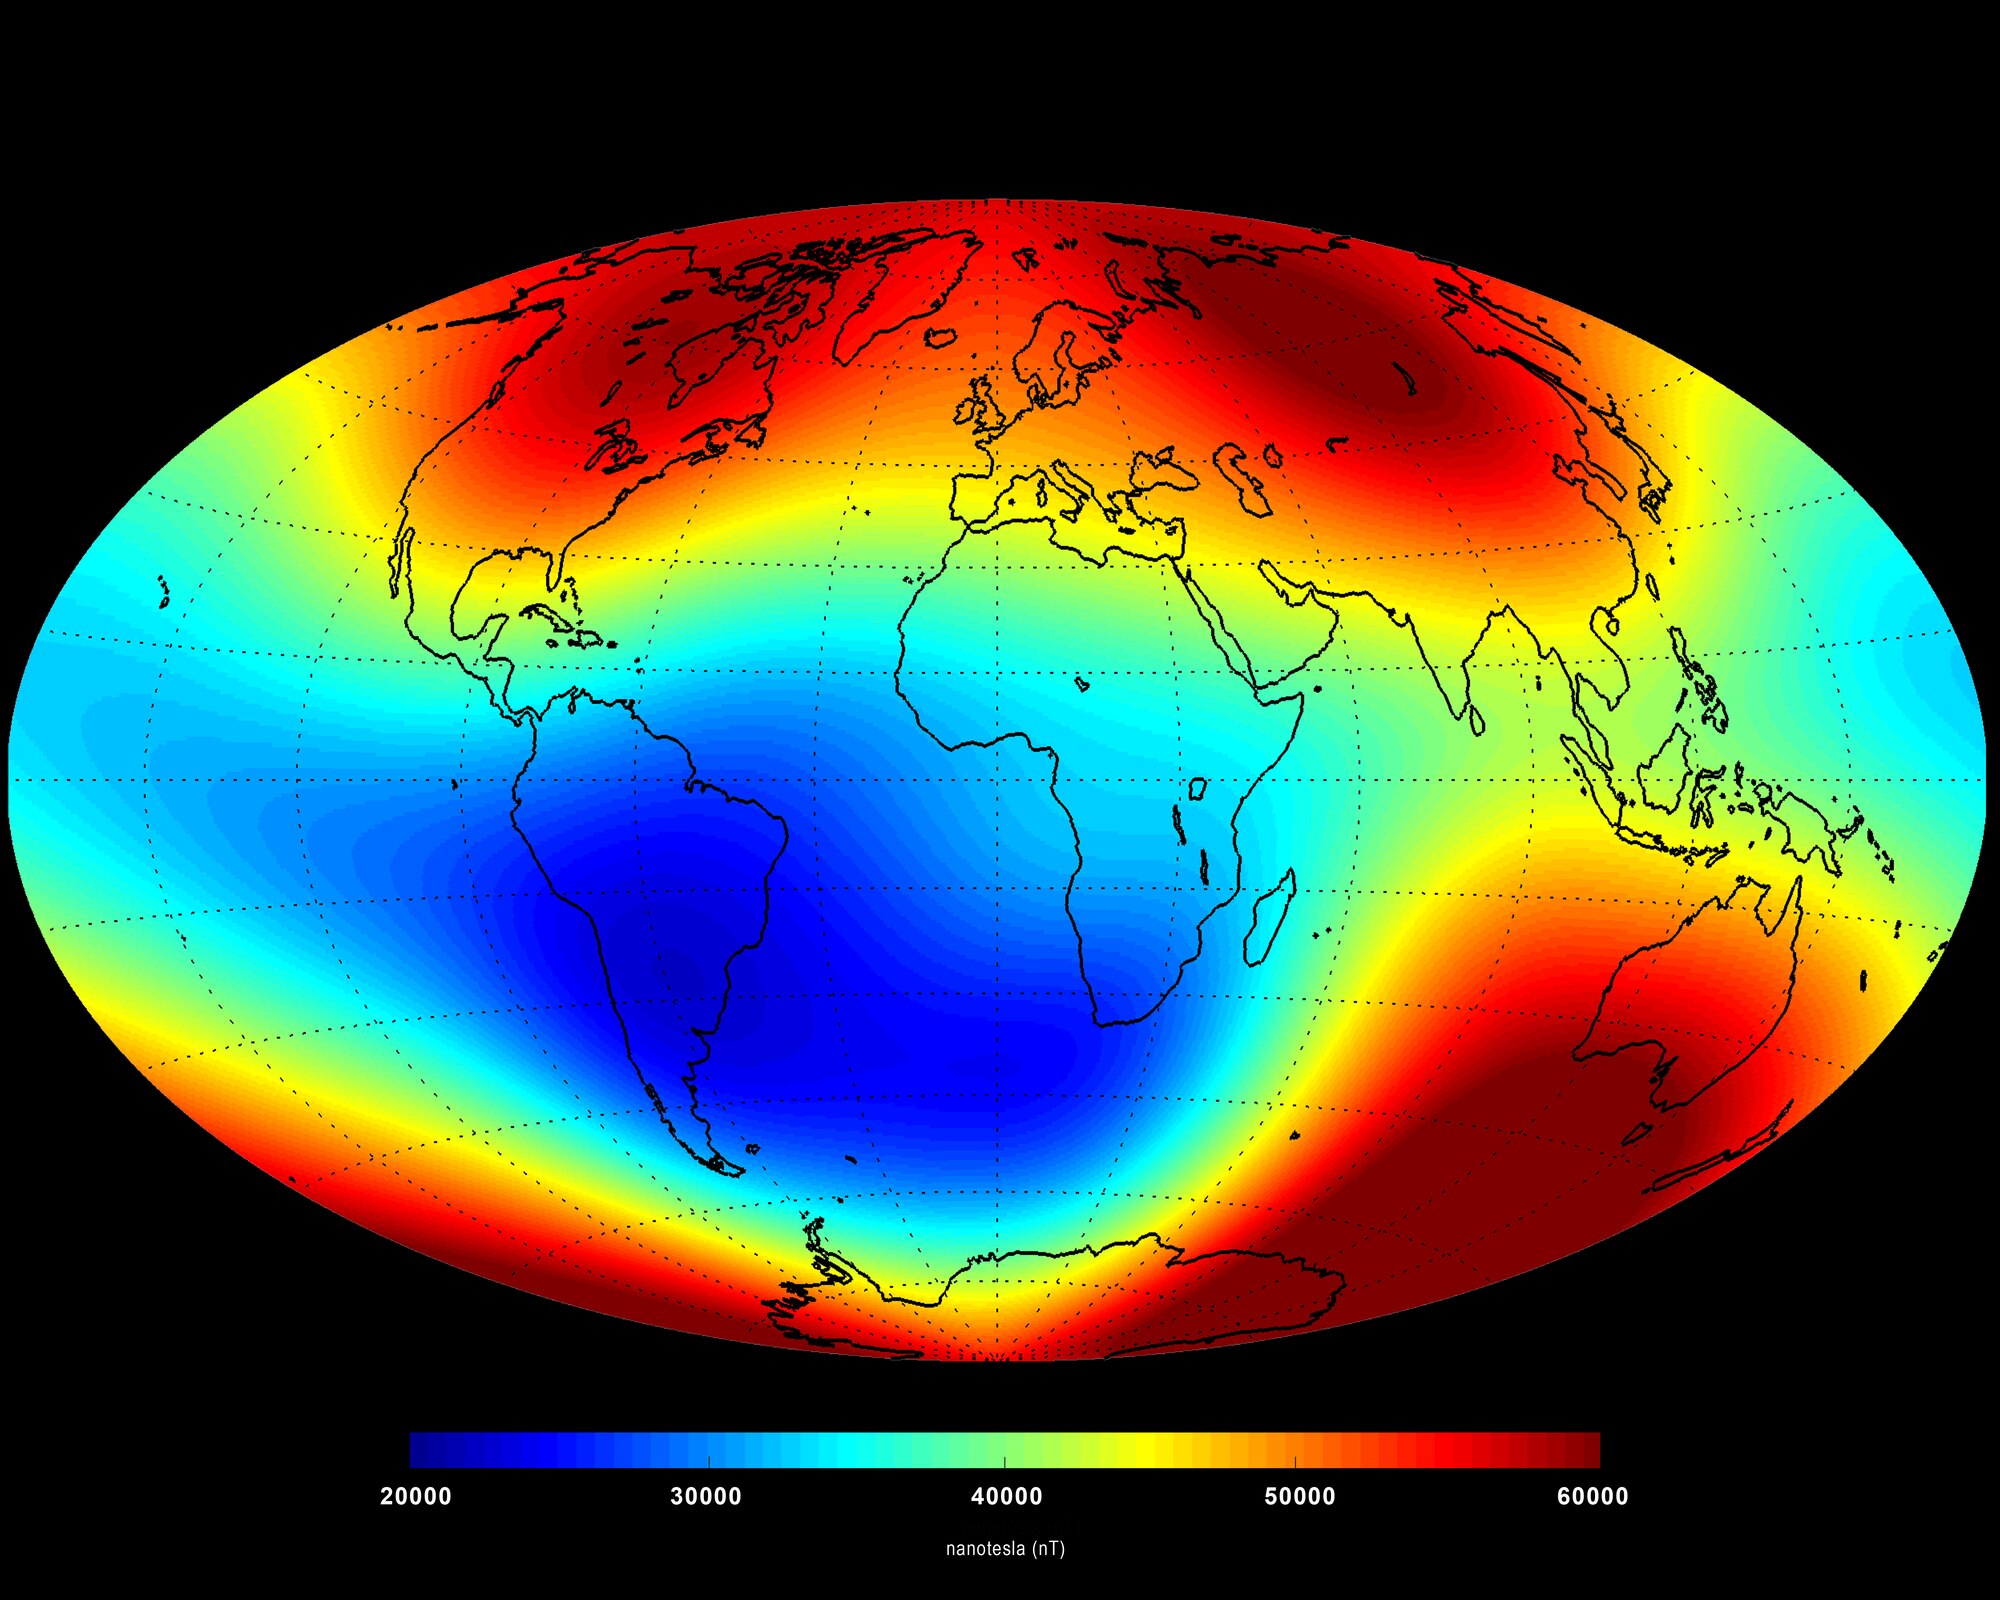 Major components of Earth’s magnetic field include the stronger core field, shown here, and the crustal field. The core field is stronger but varies slowly over time. (Courtesy graphic)